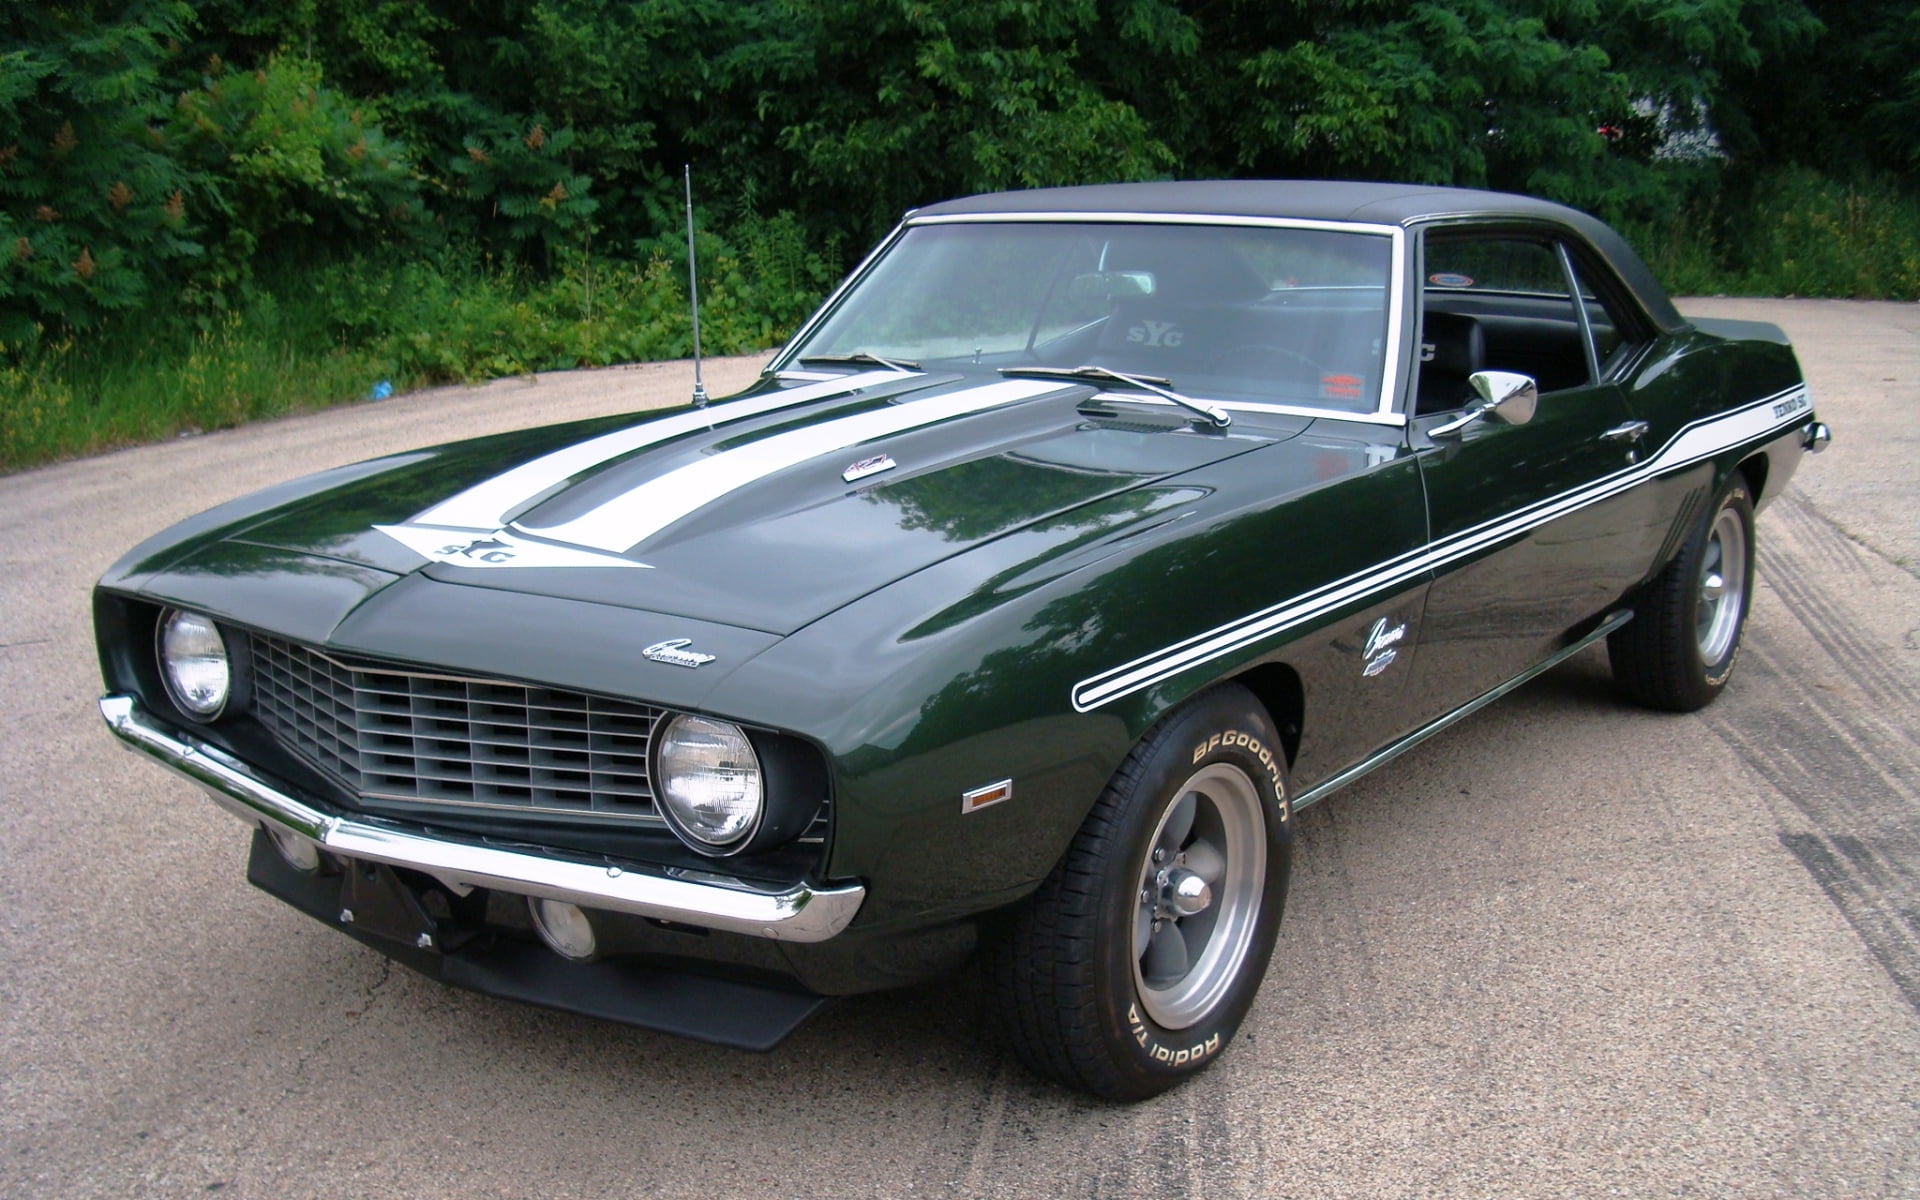 black Ford Mustang, Chevrolet, 1969, green, Camaro, classic, the front